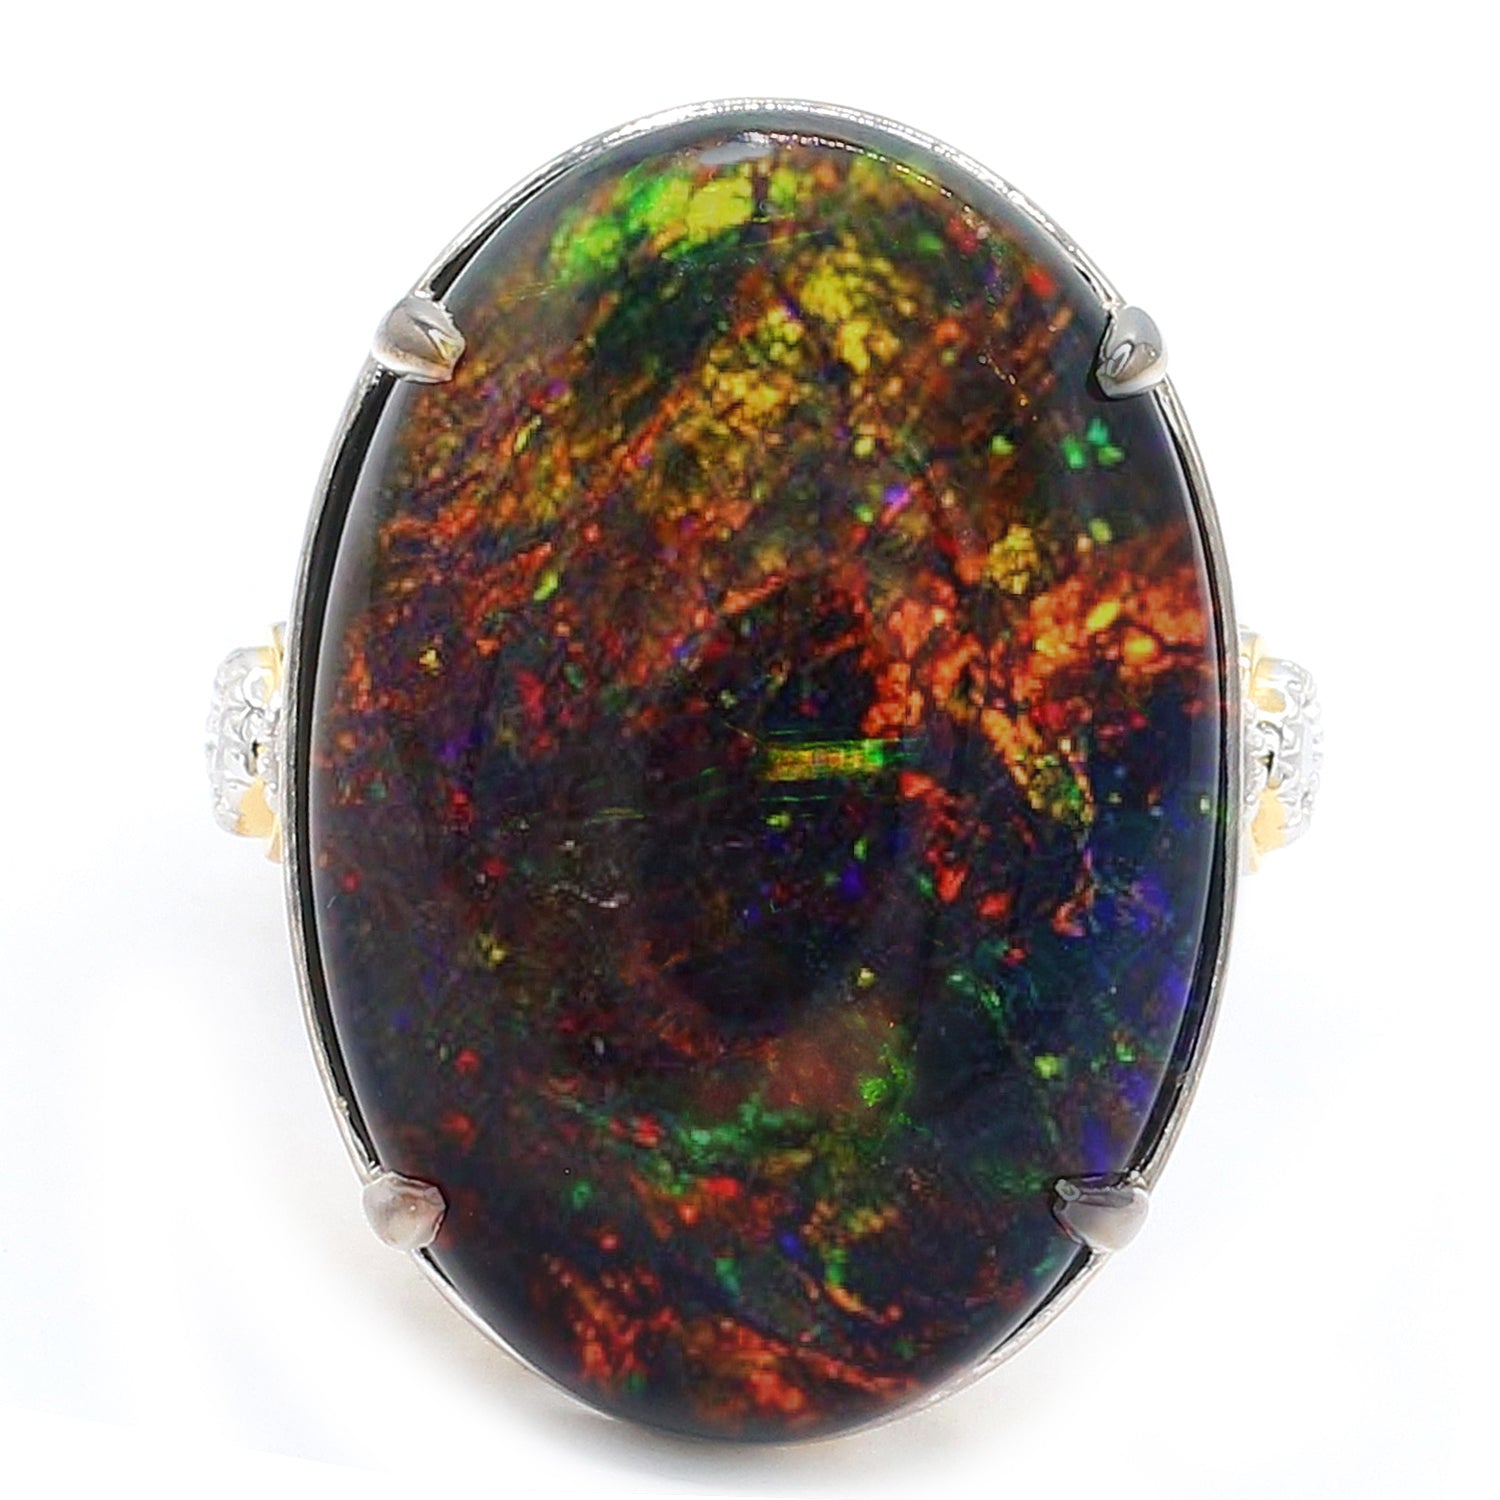 Limited Edition Gems en Vogue Luxe, One-of-a-Kind 19.38ctw Black Ethiopian Opal & White Zircon Ring